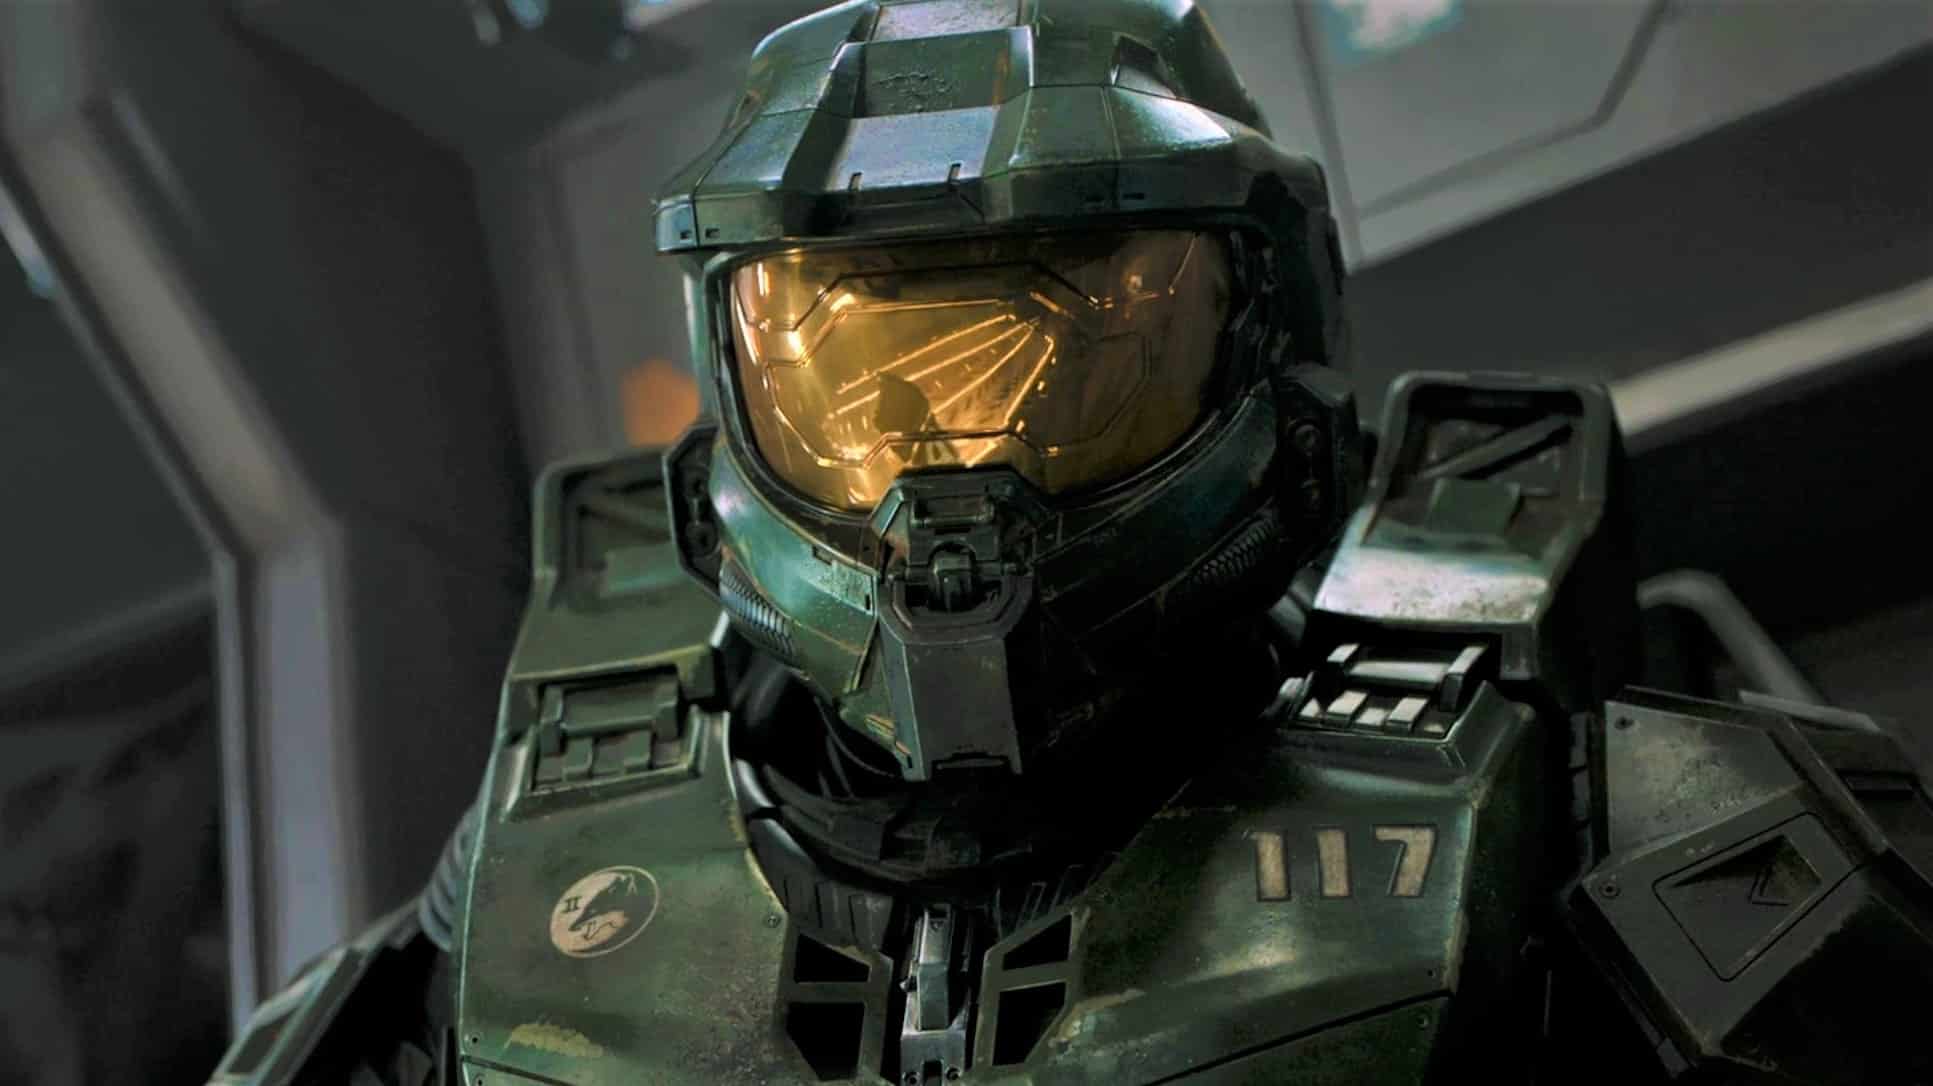 Season 2 of the Halo TV show starts production with a new